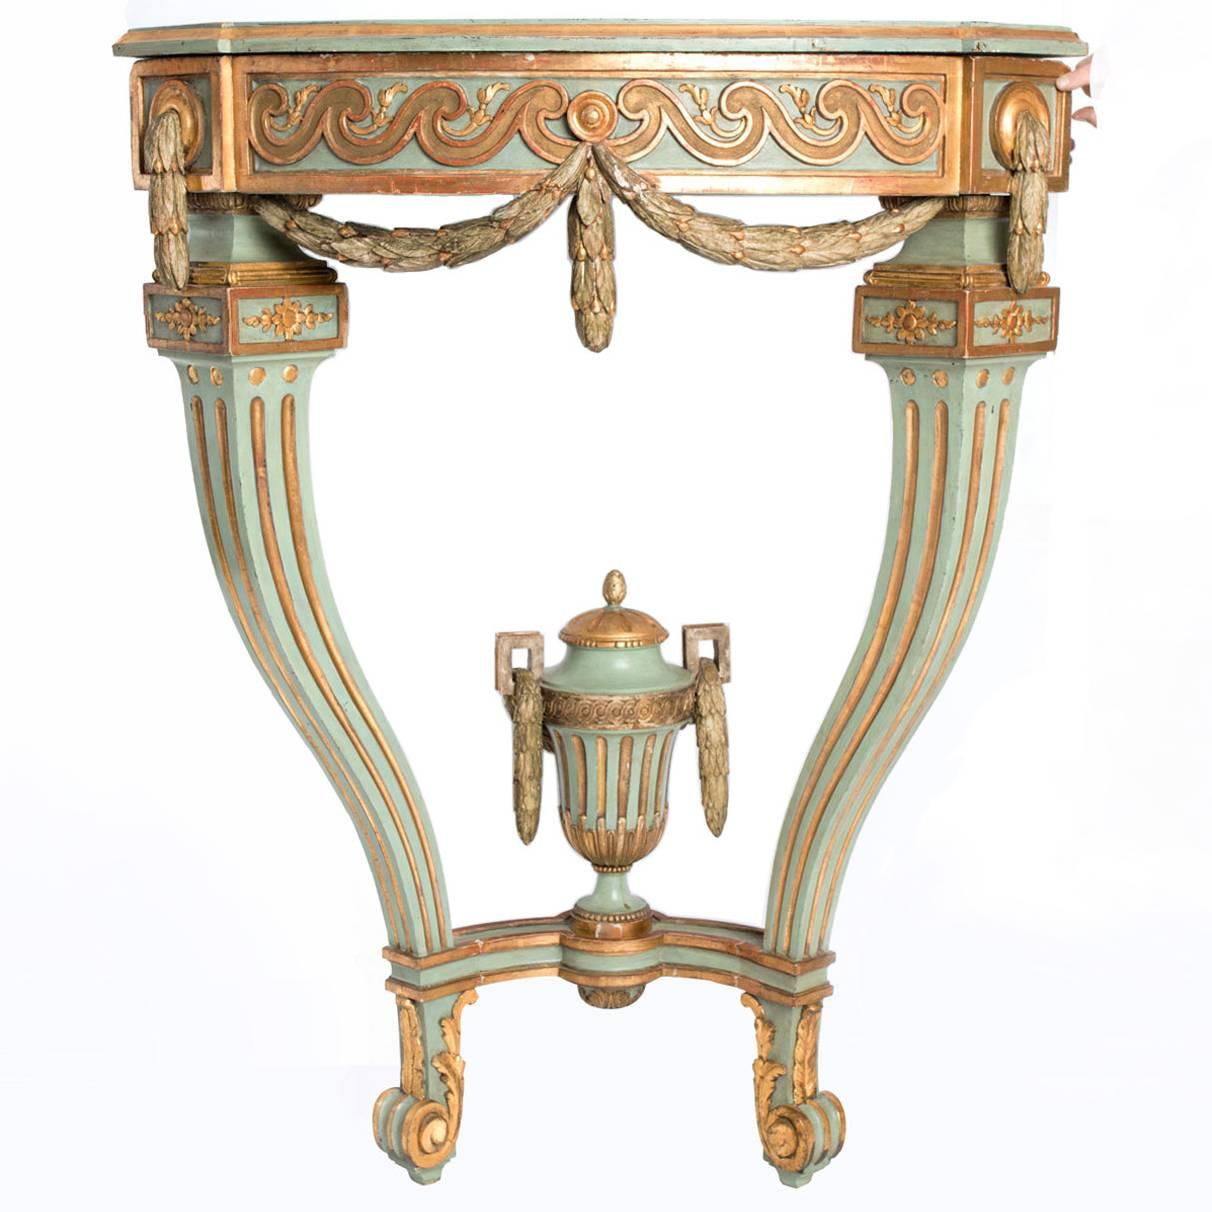 18th Century Painted and Gilded Gustavian Corner Console Table